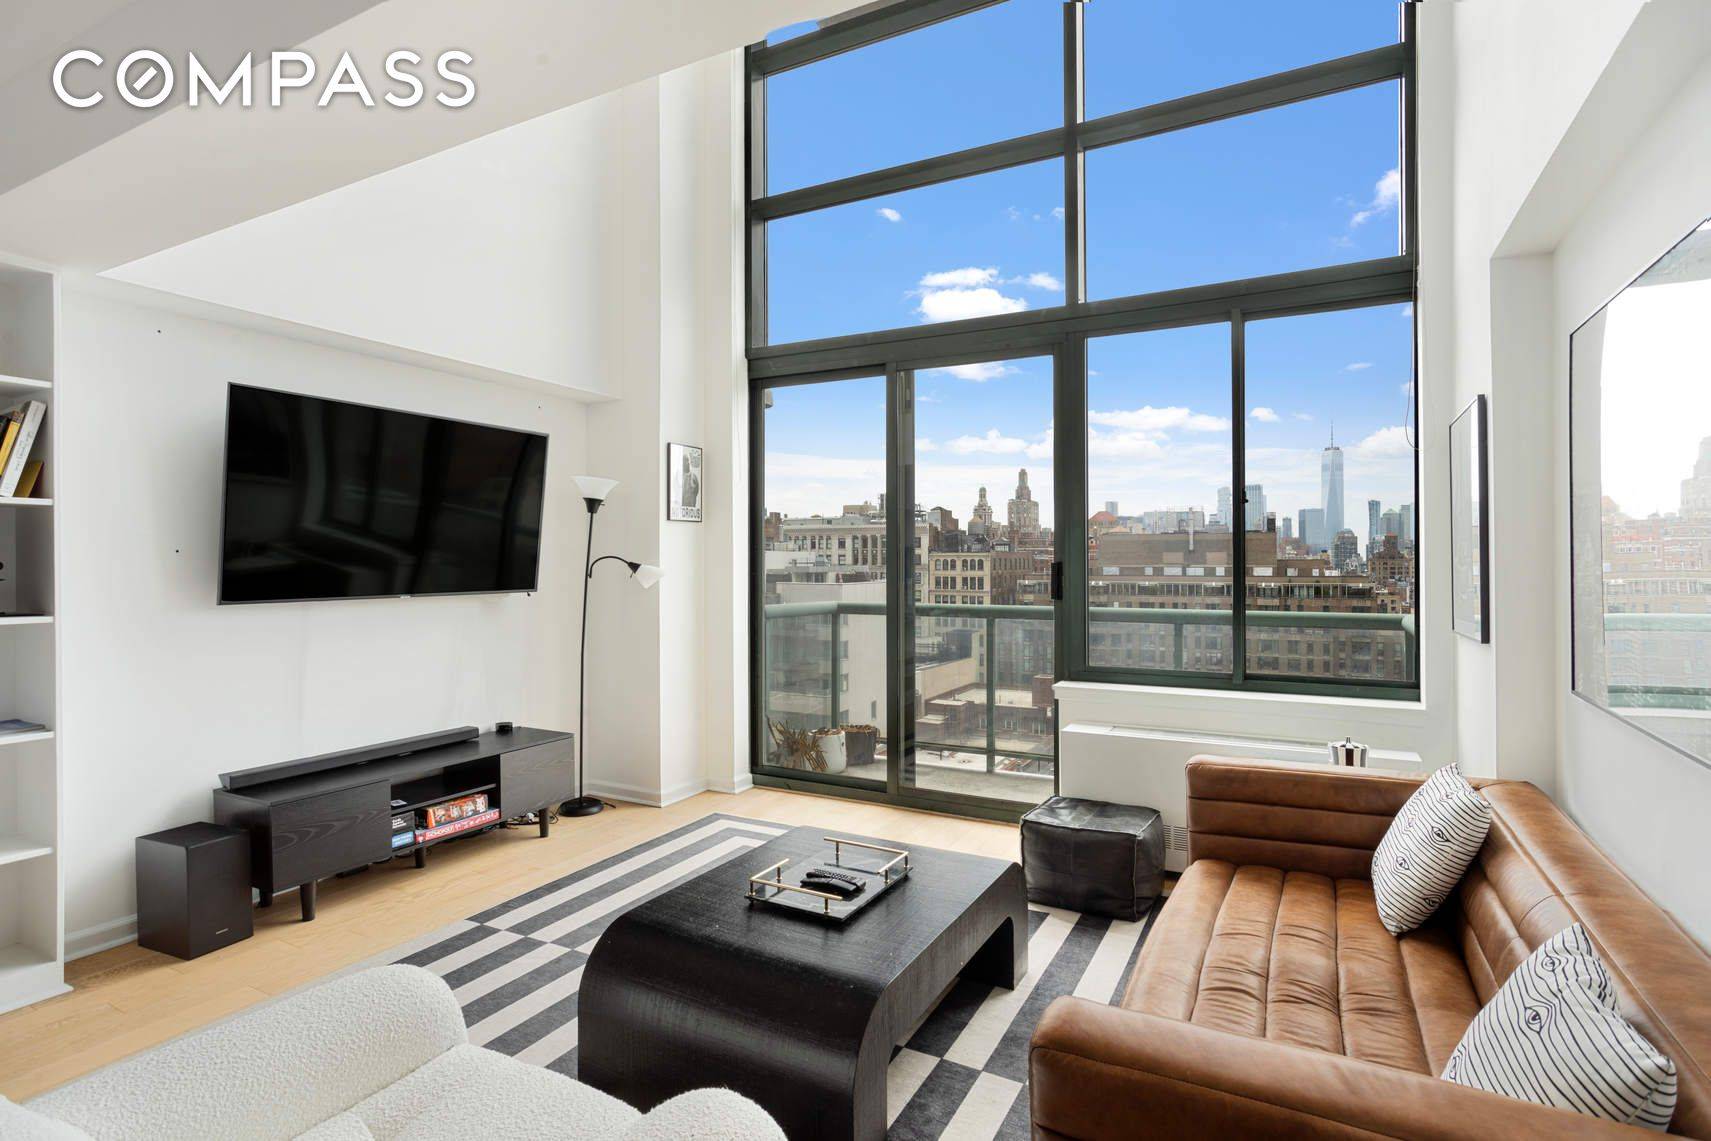 Luxury duplex perfectly located between Greenwich Village and Flatiron is this modern 1 Bedroom 1.